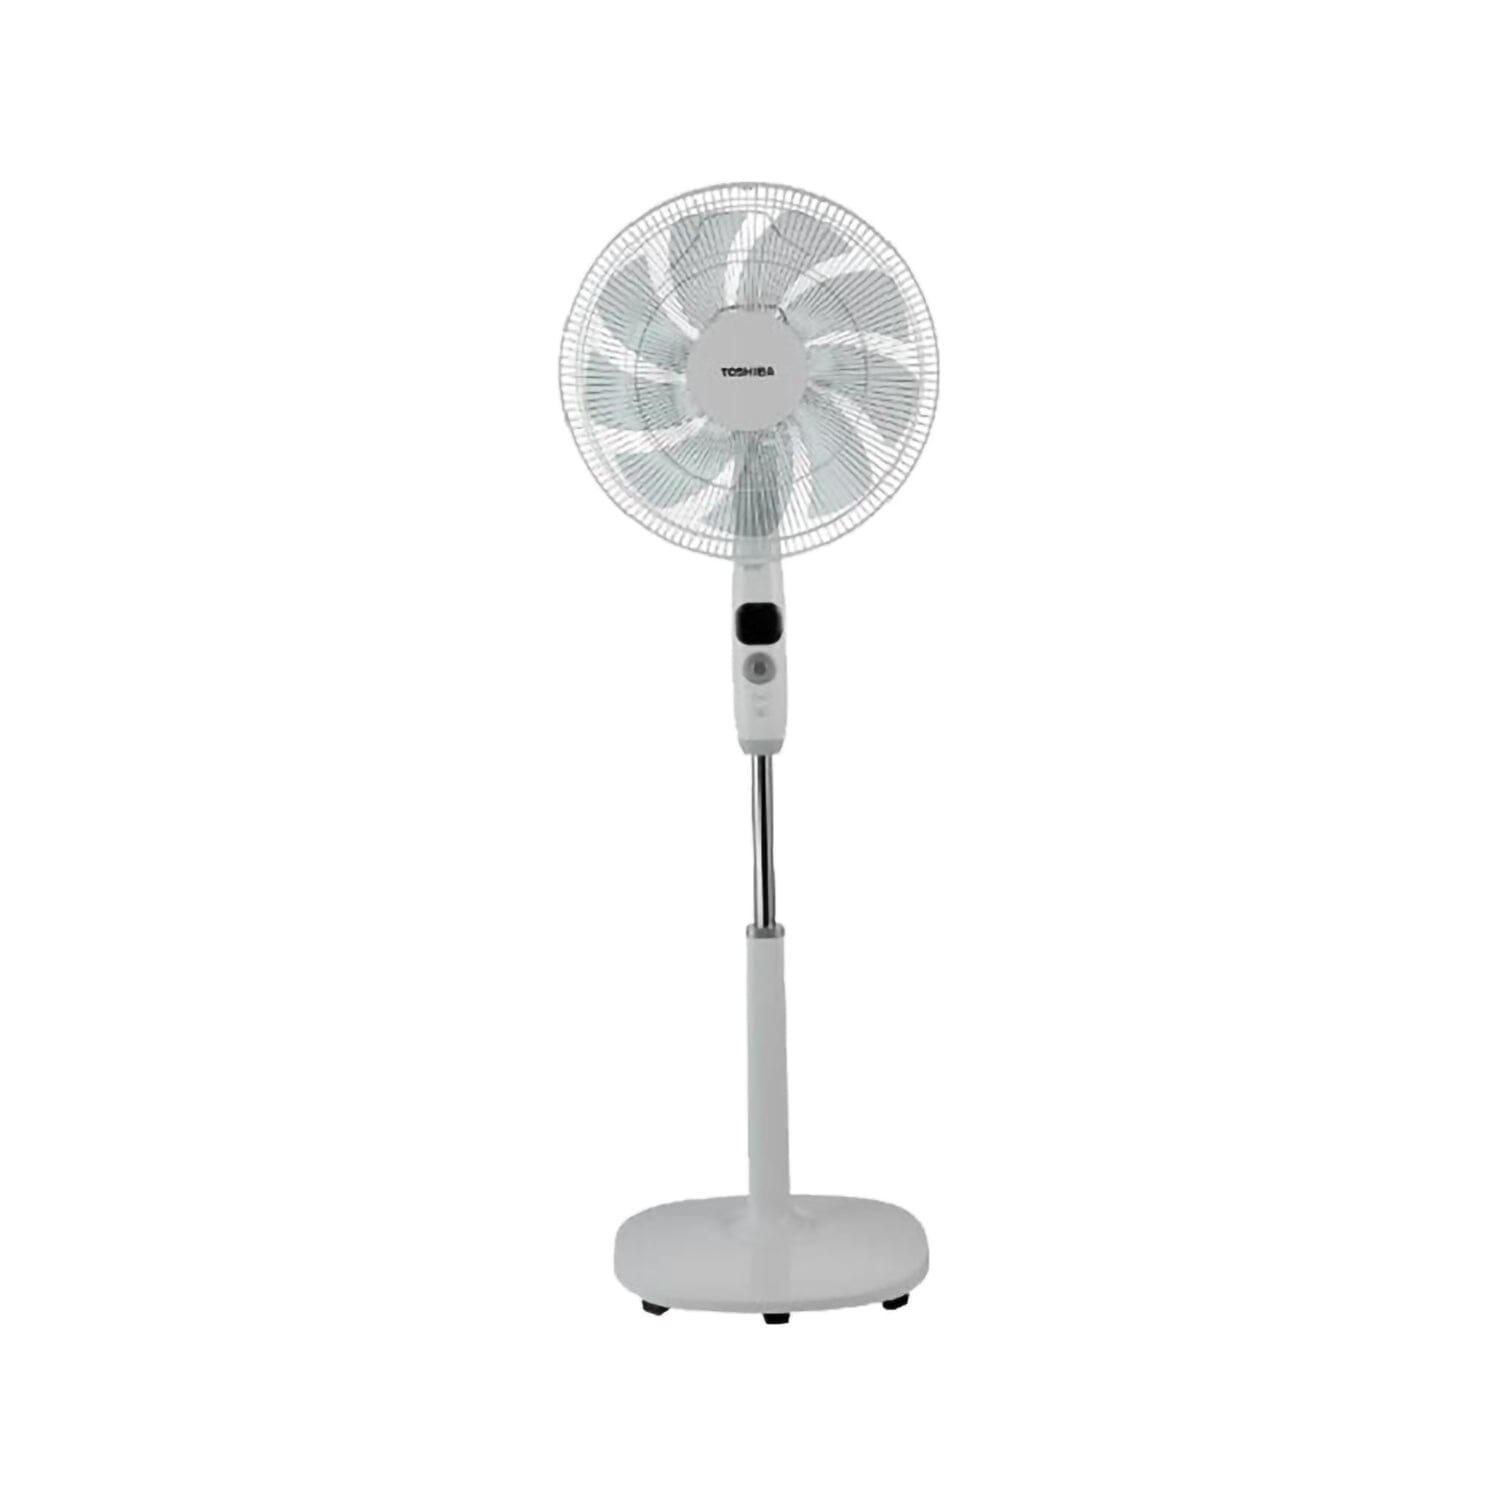 Toshiba 16" Stand Fan, Wide Angle Oscillation Blades DC Inverter Stand Fan with Infra Remote Control Toshiba 